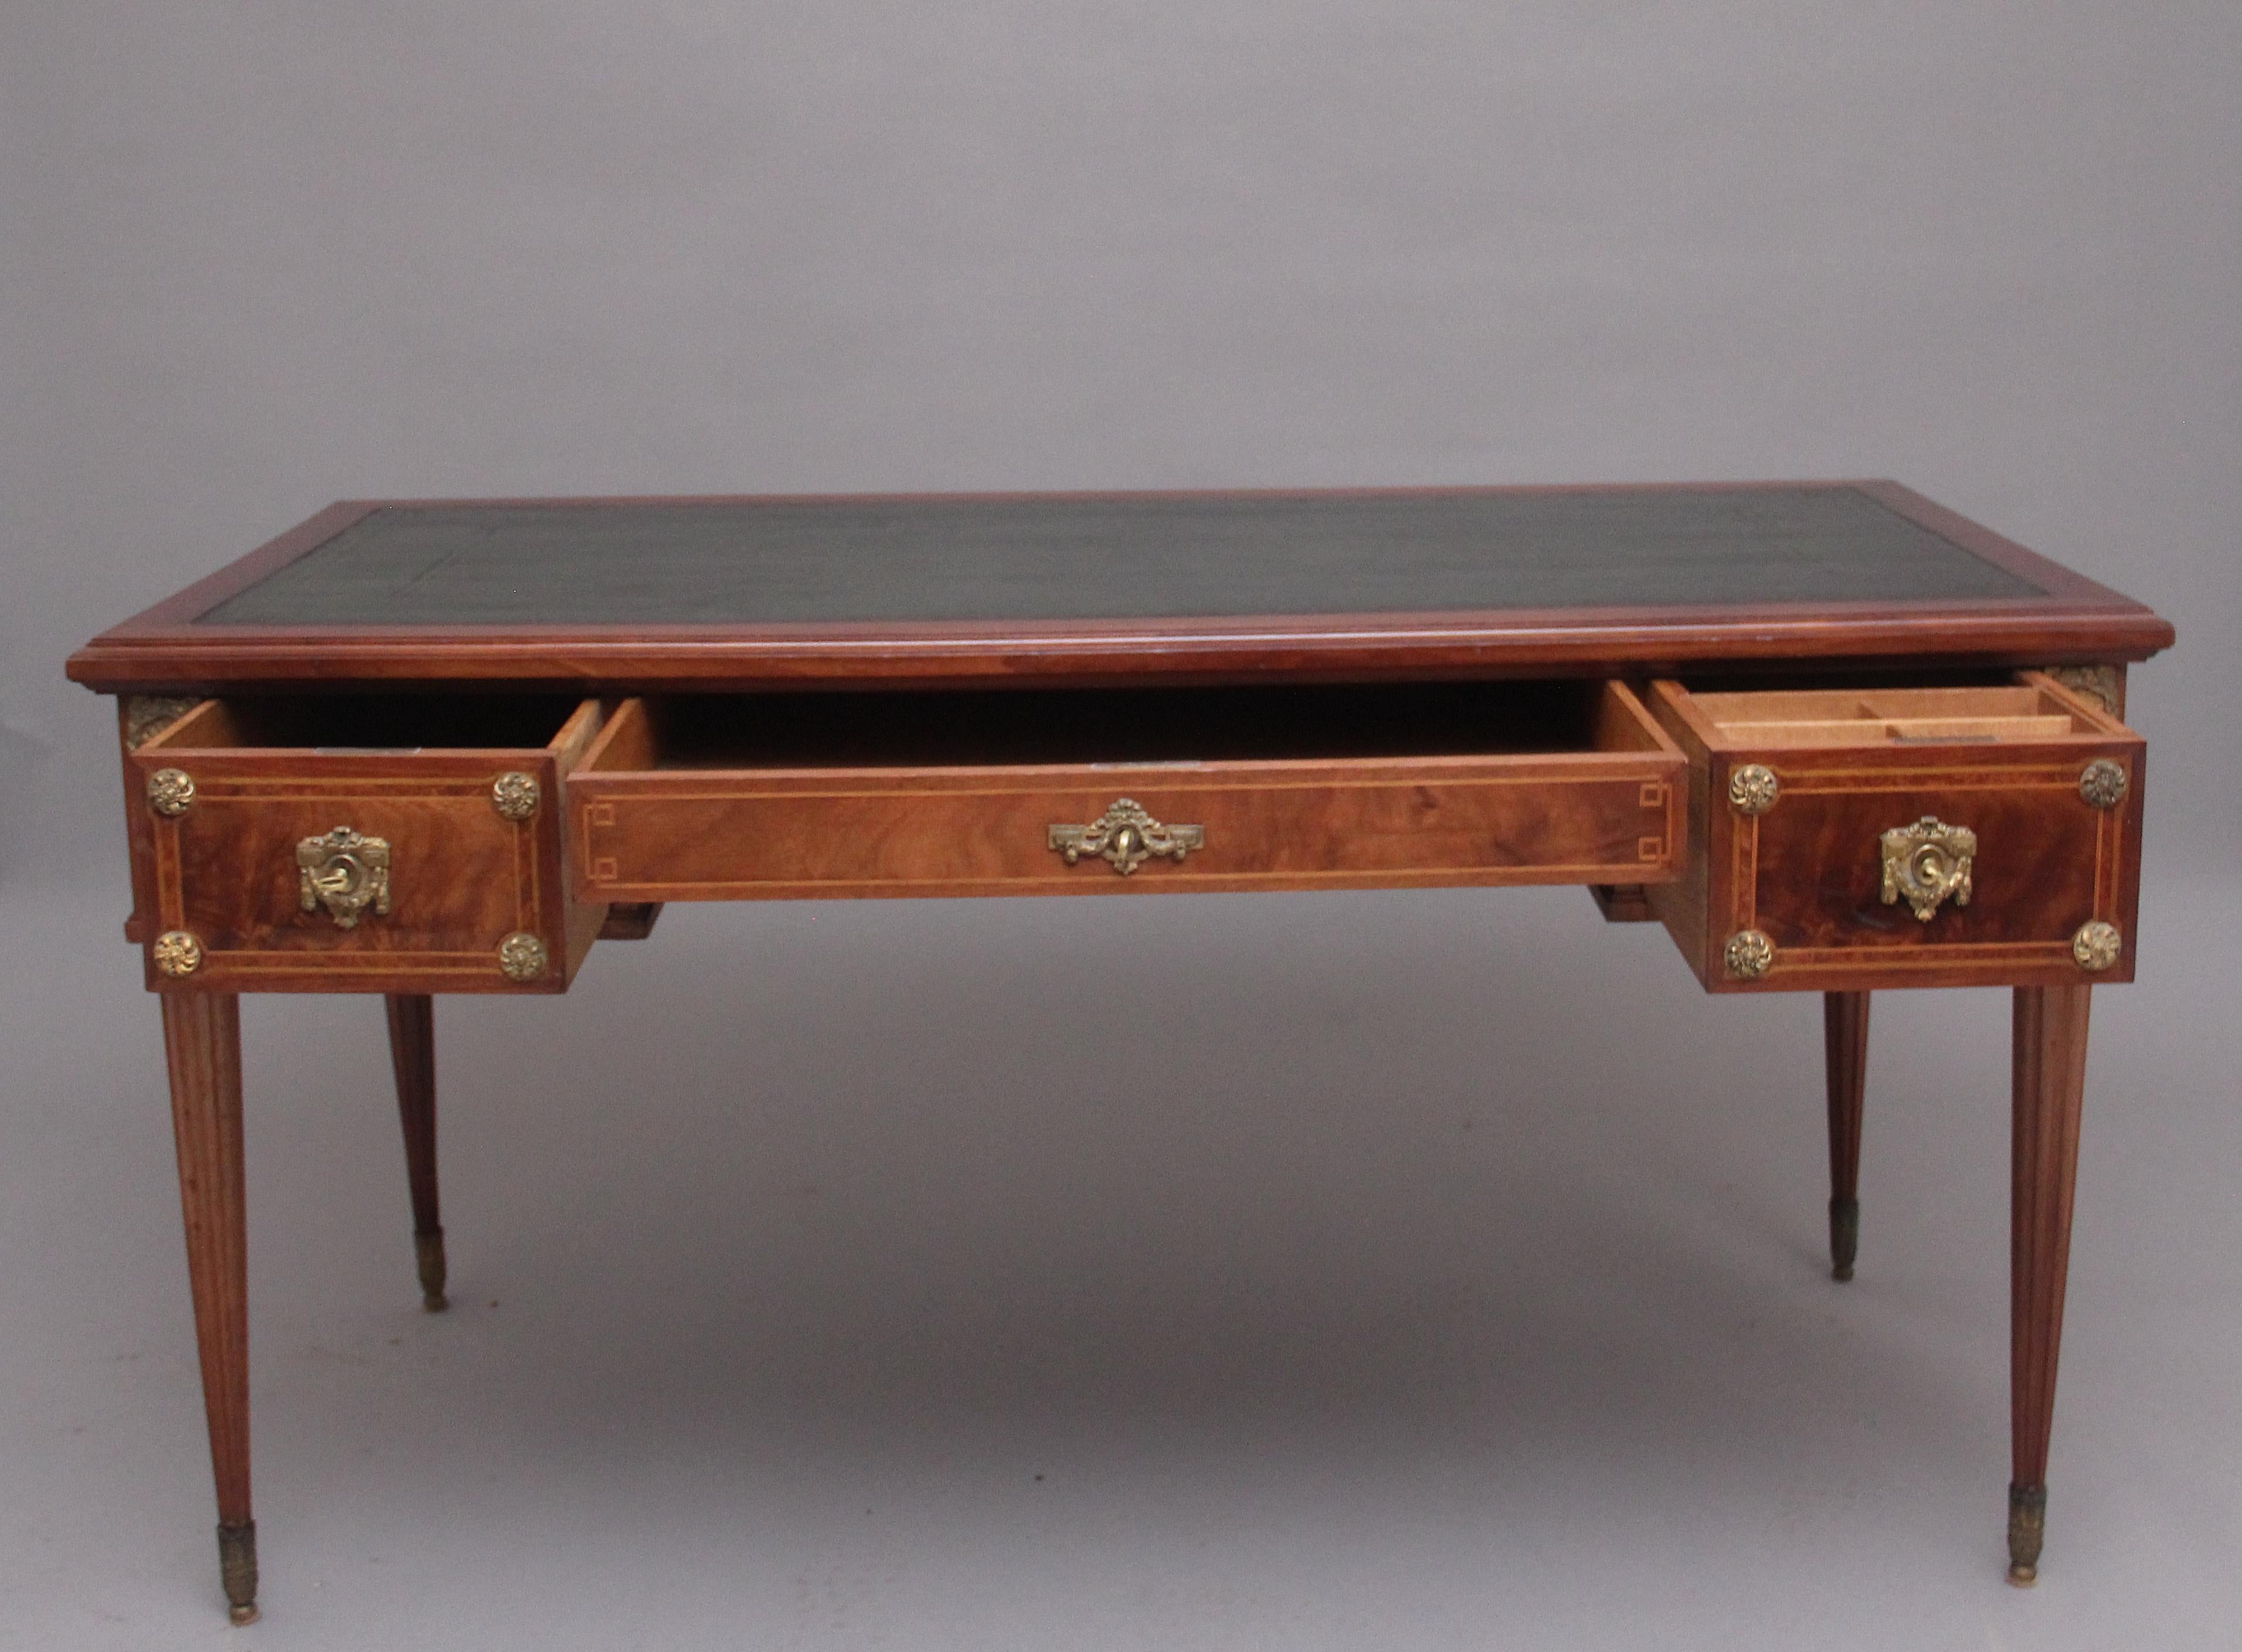 A freestanding 19th century French mahogany writing desk, the moulded edge top having a green leather writing surface decorated with blind and gilt tooling, the front of the desk consisting of three oak lined drawers with original decorative brass